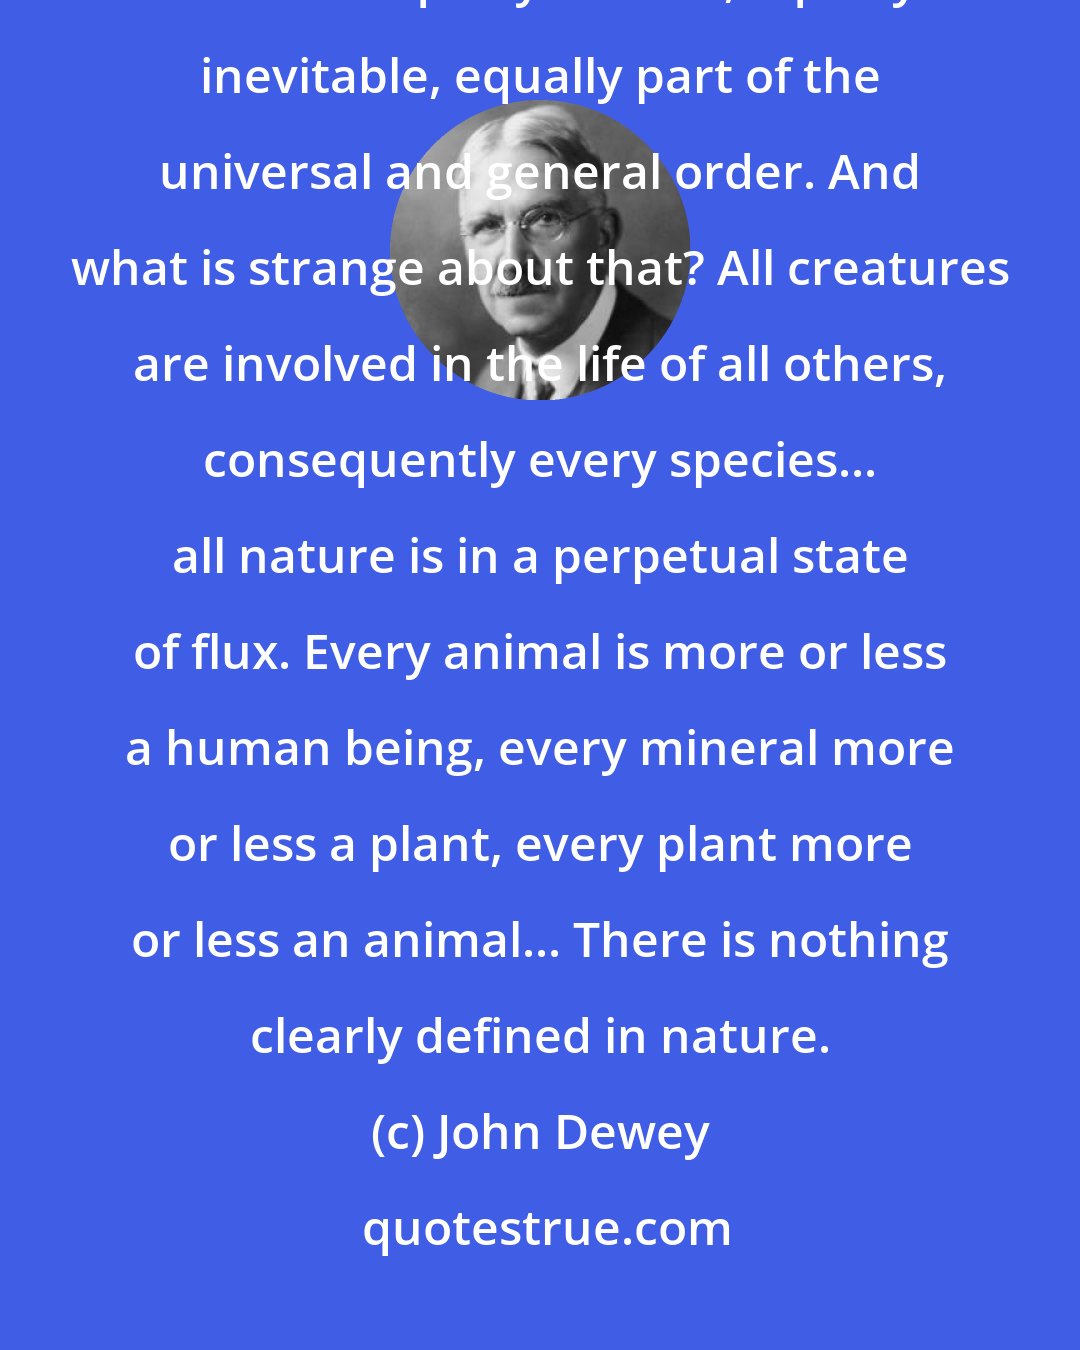 John Dewey: Man is merely a frequent effect, a monstrosity is a rare one, but both are equally natural, equally inevitable, equally part of the universal and general order. And what is strange about that? All creatures are involved in the life of all others, consequently every species... all nature is in a perpetual state of flux. Every animal is more or less a human being, every mineral more or less a plant, every plant more or less an animal... There is nothing clearly defined in nature.